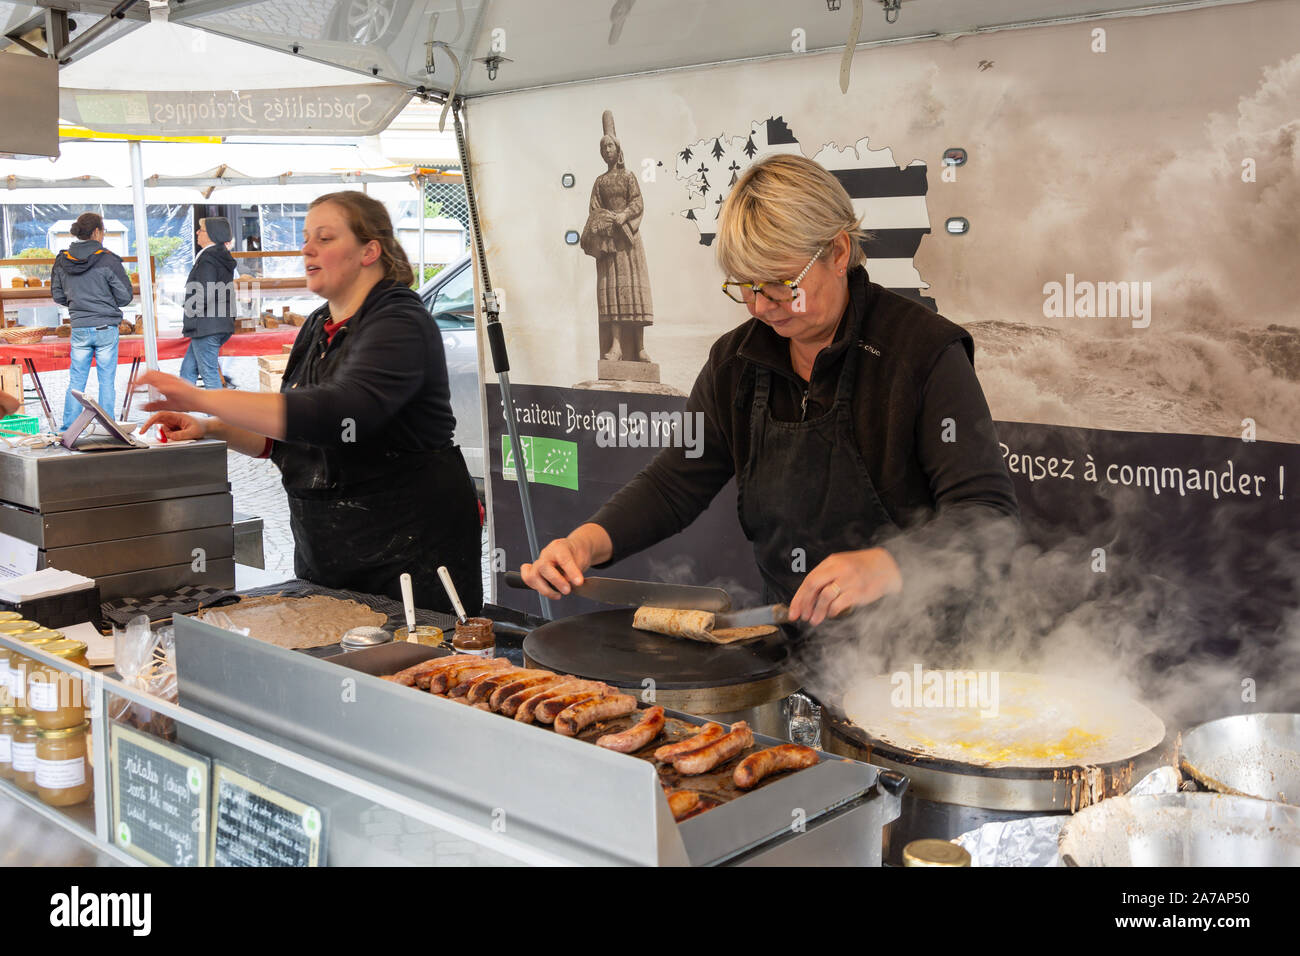 Typical Breton sausage crepe stall, Place de Catherine, Honfleur, Normandy, France Stock Photo